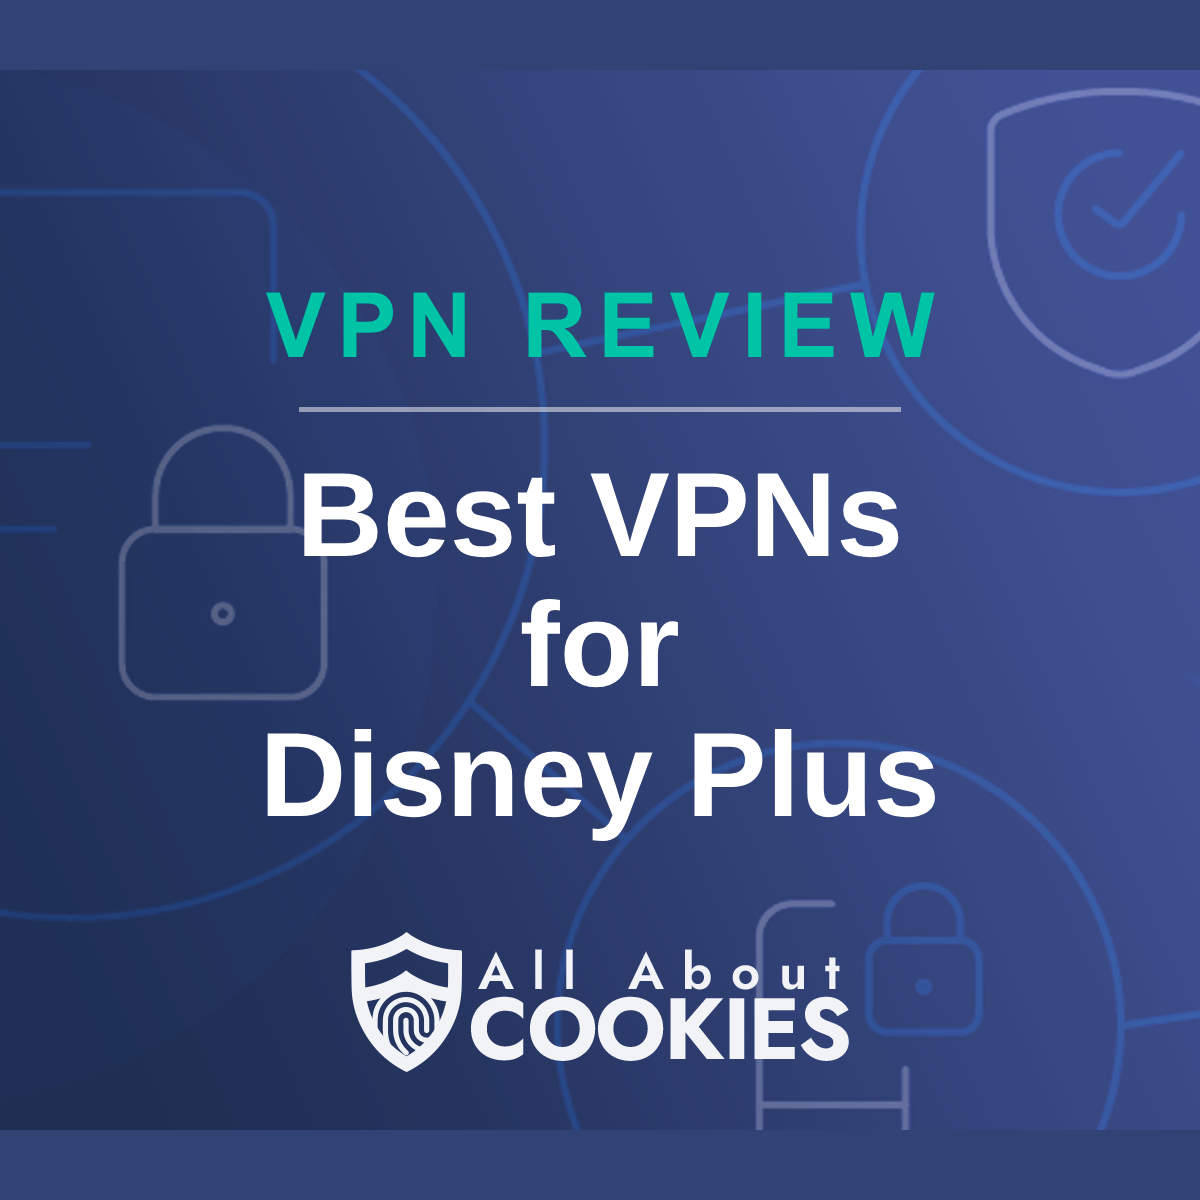 A blue background with images of locks and shields with the text &quot;Best VPNs for Disney Plus&quot; and the All About Cookies logo. 